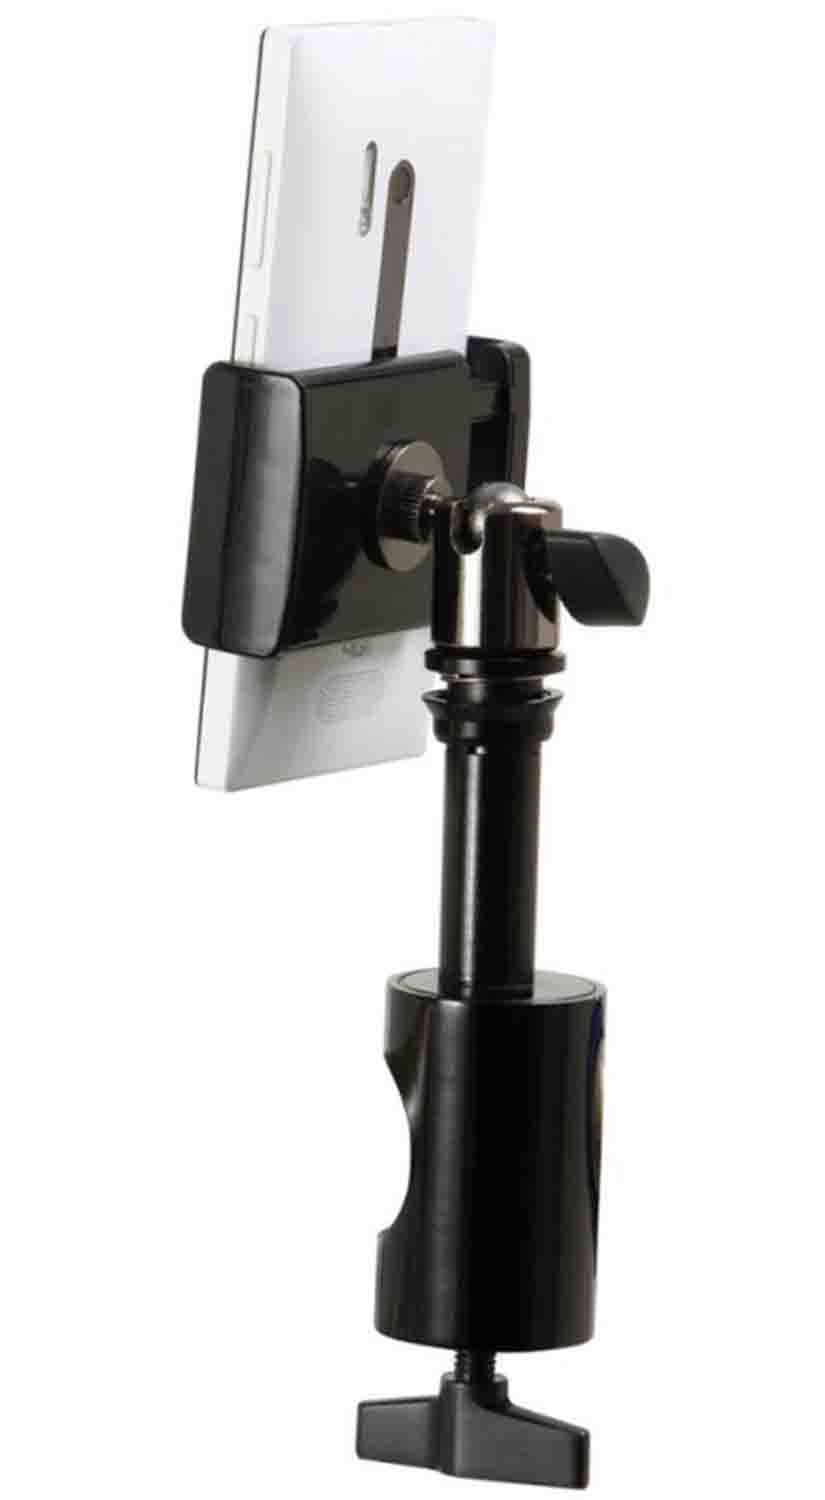 OnStage TCM1901 Grip-On Universal Device Holder System with Round Clamp - Black - Hollywood DJ